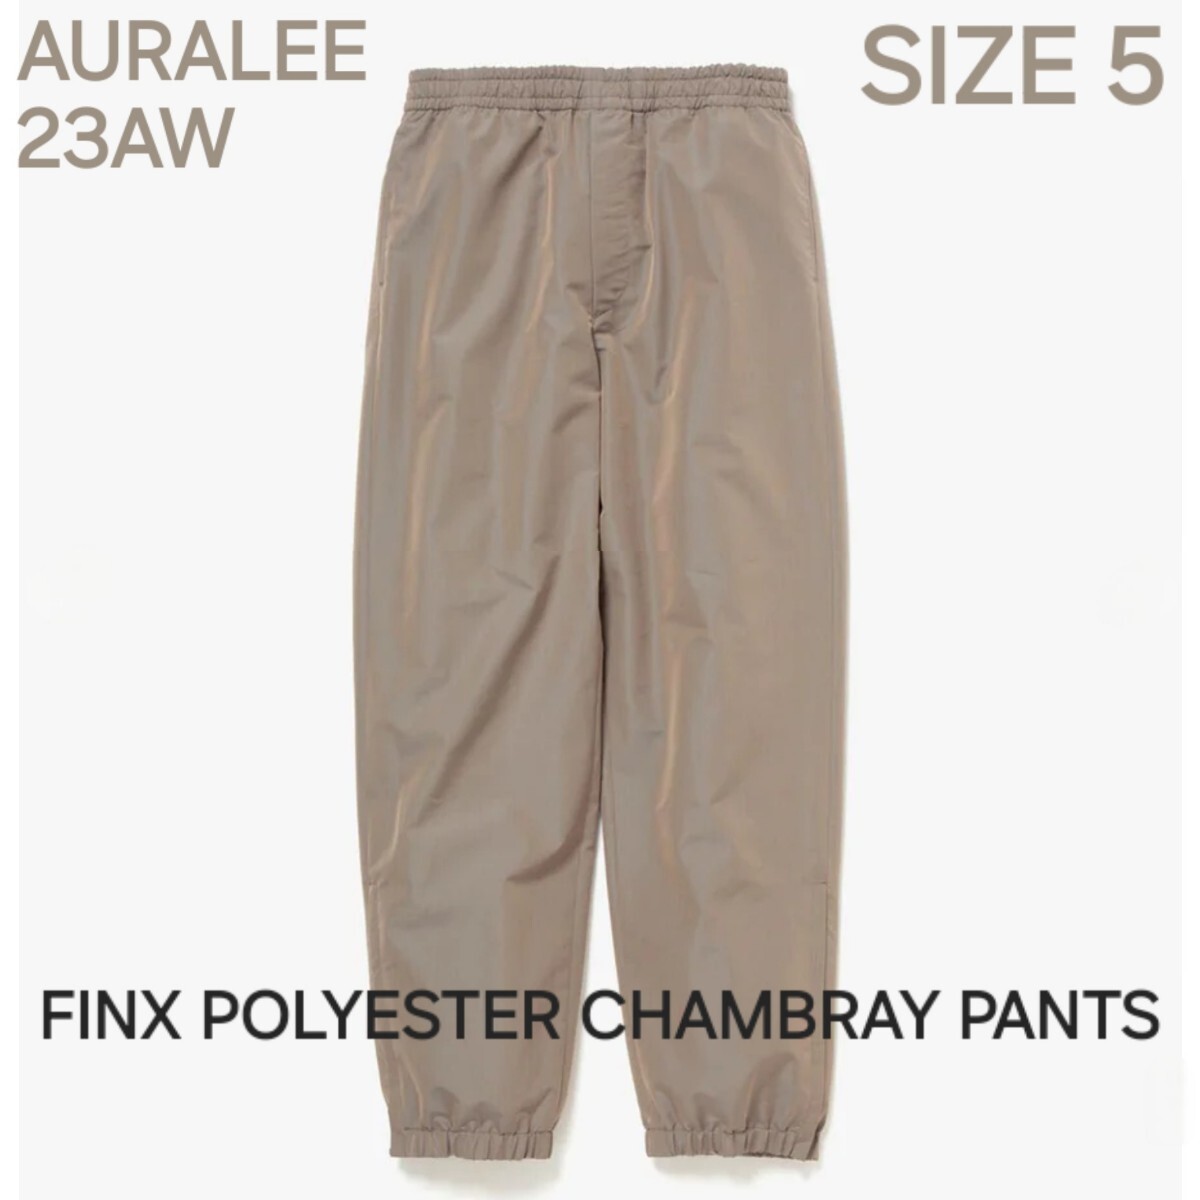 AURALEEo- Rally 23AW FINX POLYESTER CHAMBRAY PANTS A23AP03FP SIZE 5